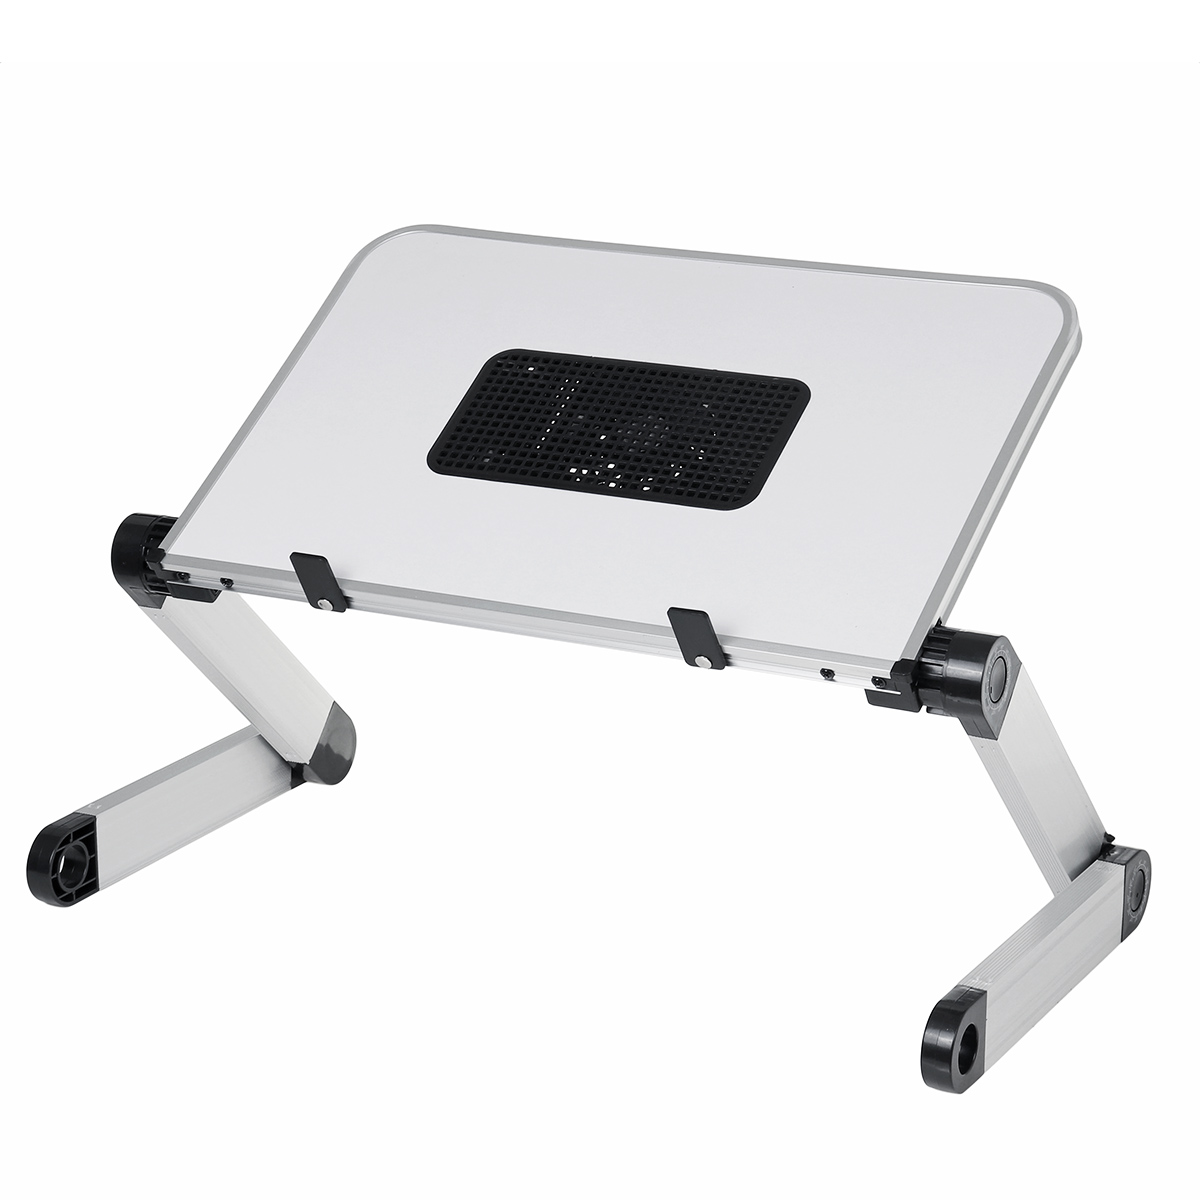 5026cm-Enlarge-Foldable-with-Cooling-Fan-Hole-Aluminum-Laptop-Computer-Desk-Table-TV-Bed-Computer-Ma-1700717-8